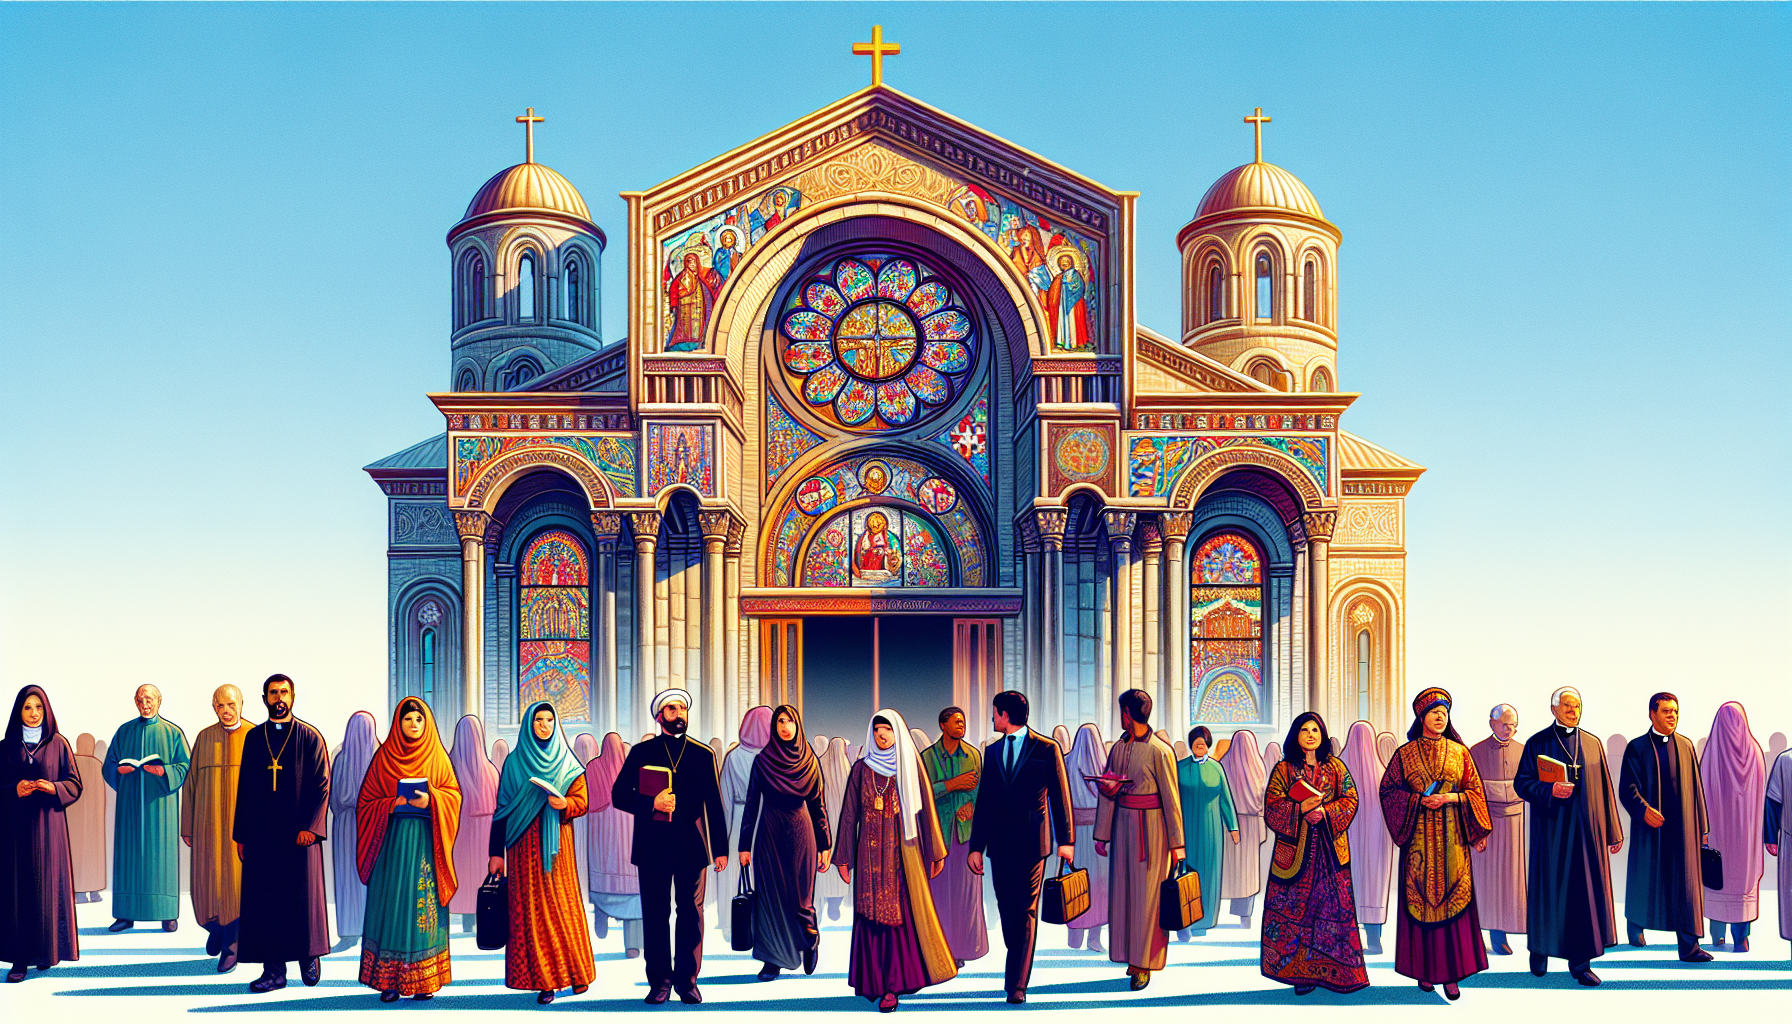 An old, intricately designed Apostolic church with stained glass windows and a group of diverse people entering, under a sunny blue sky, illustrating different cultures coming together in a religious